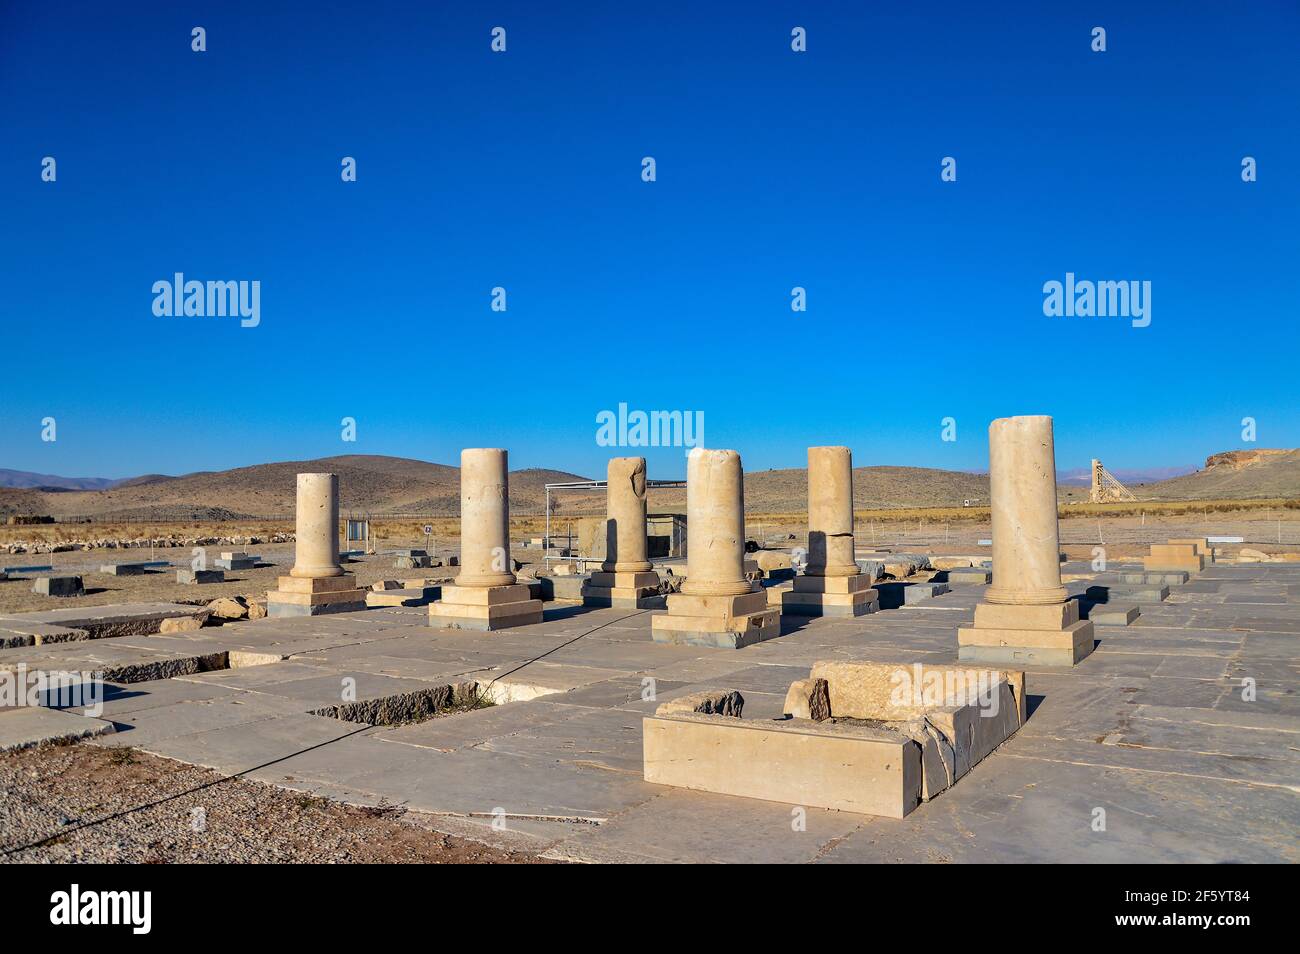 Ruins of the Private Palace at the ancient capital of the Achaemenid empire, Pasargadae, near Shiraz in Iran Stock Photo